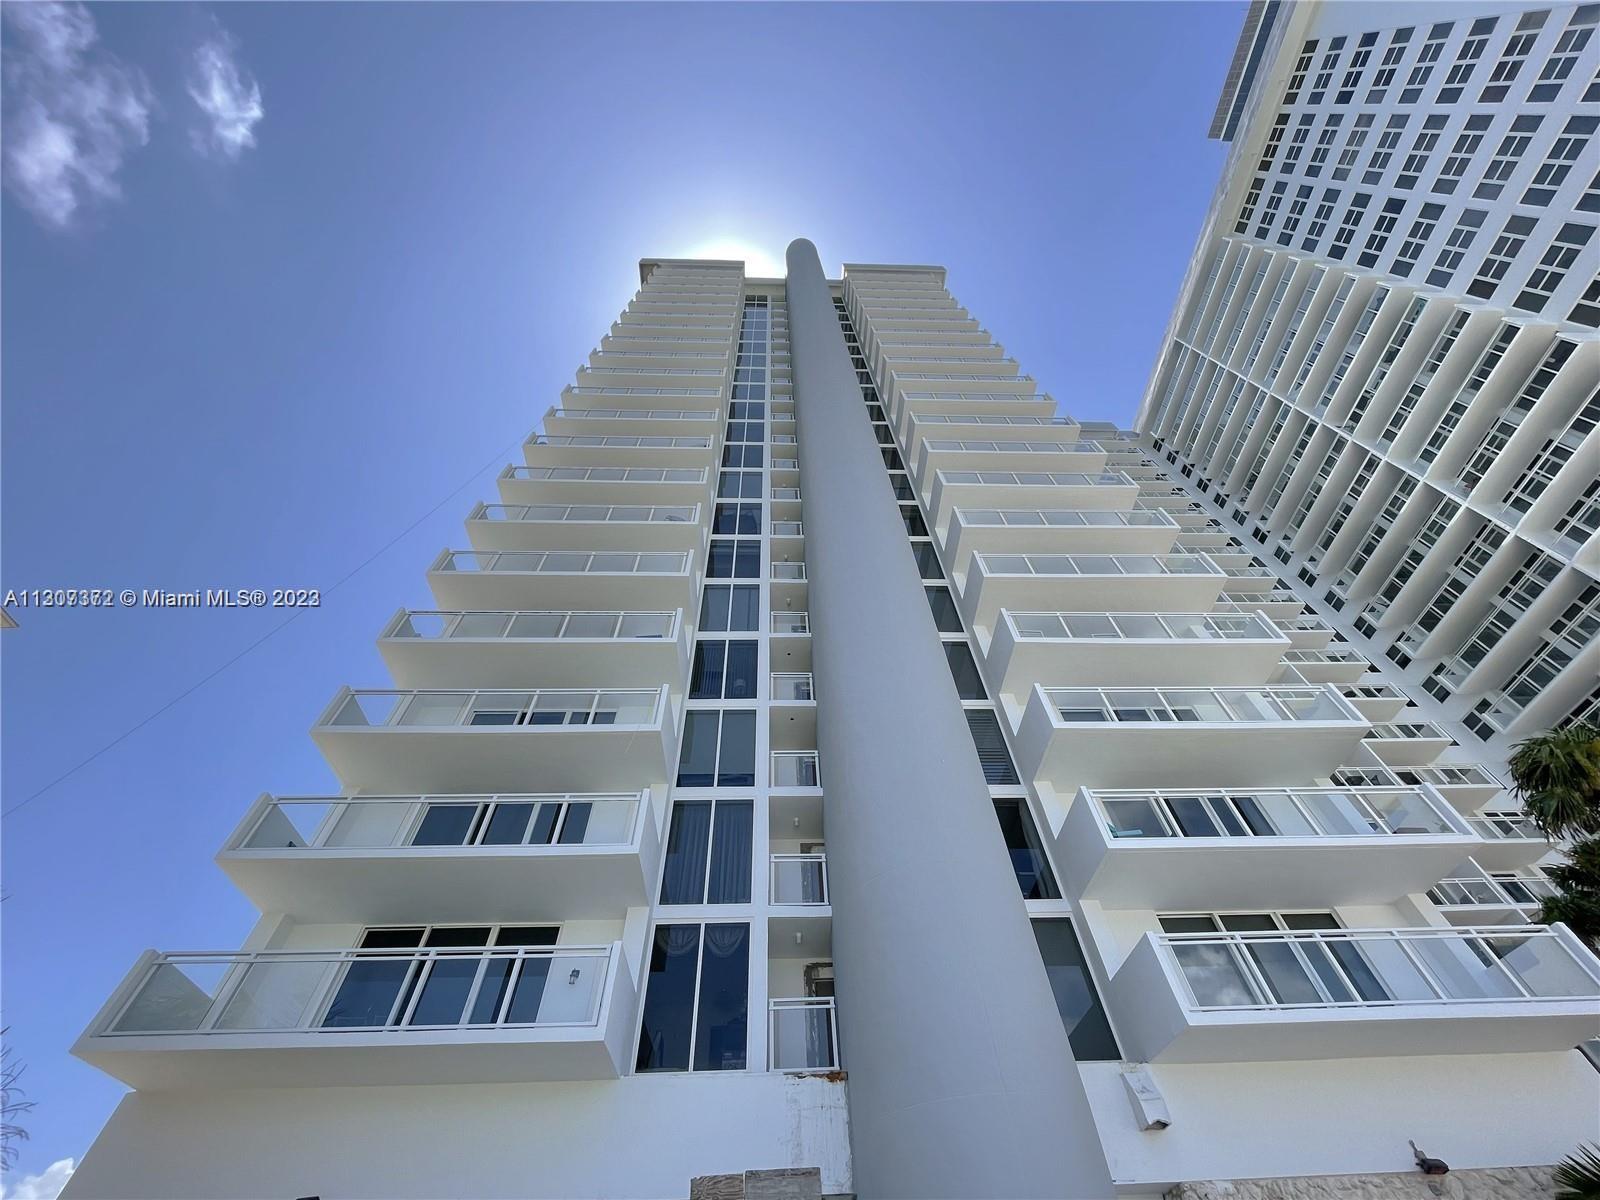 EXCELLENT VALUE!  DON'T MISS YOUR OPPORTUNITY TO OWN A 2 BEDROOM 2 BATH RESIDENCE AT AN OCEANFRONT L